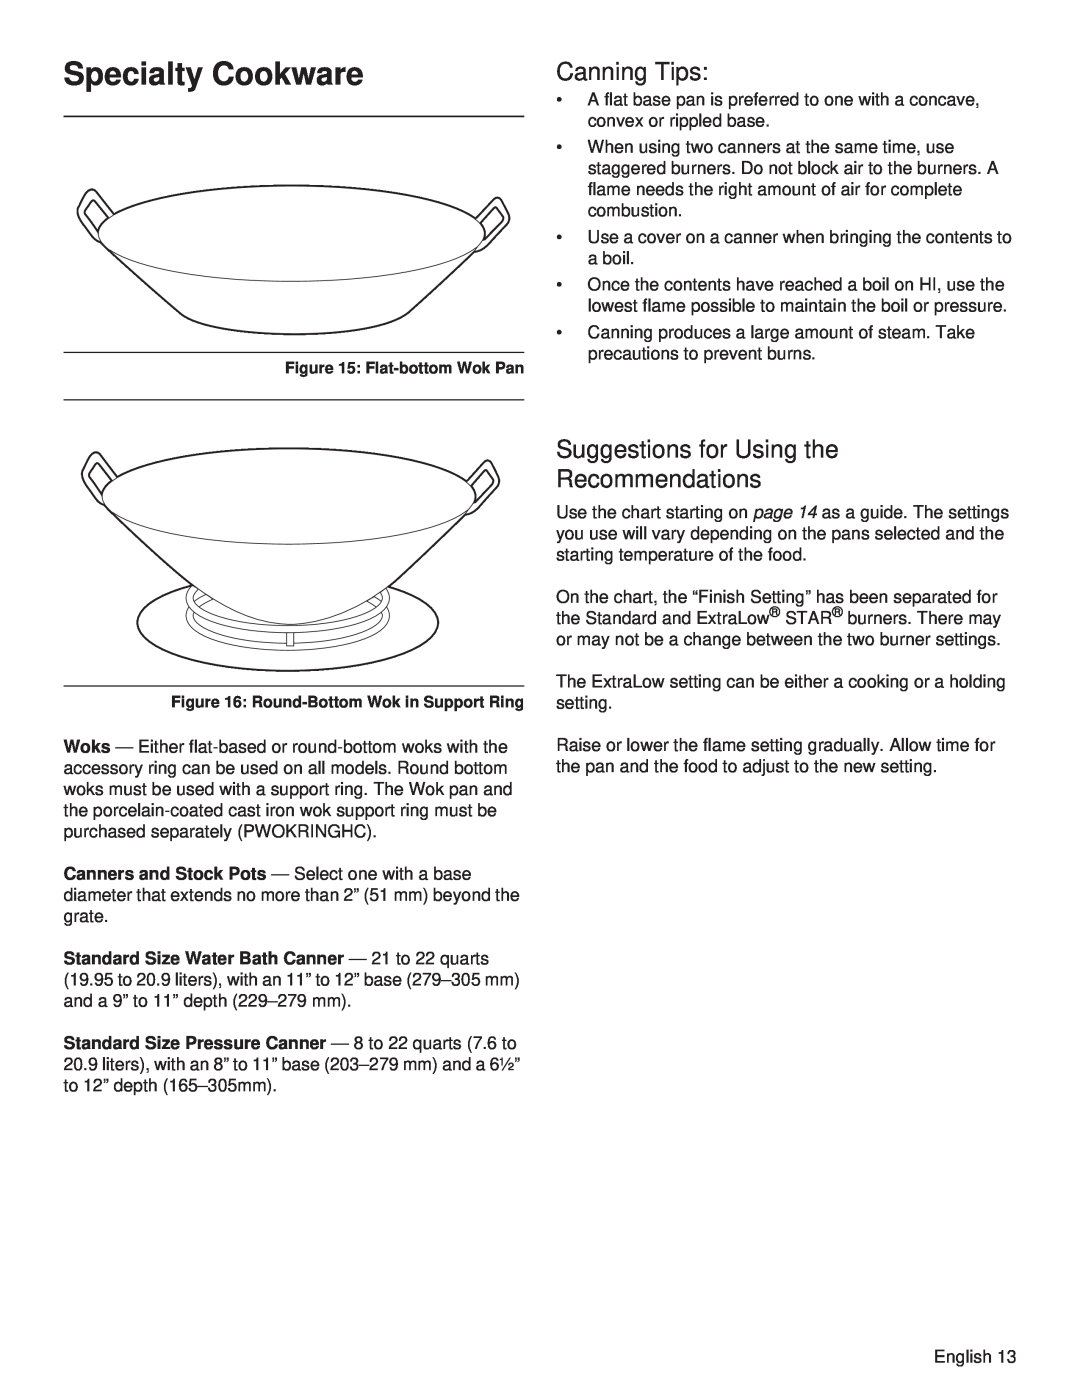 Thermador PCG36, PCG48, PCG30 manual Specialty Cookware, Canning Tips, Suggestions for Using the Recommendations 